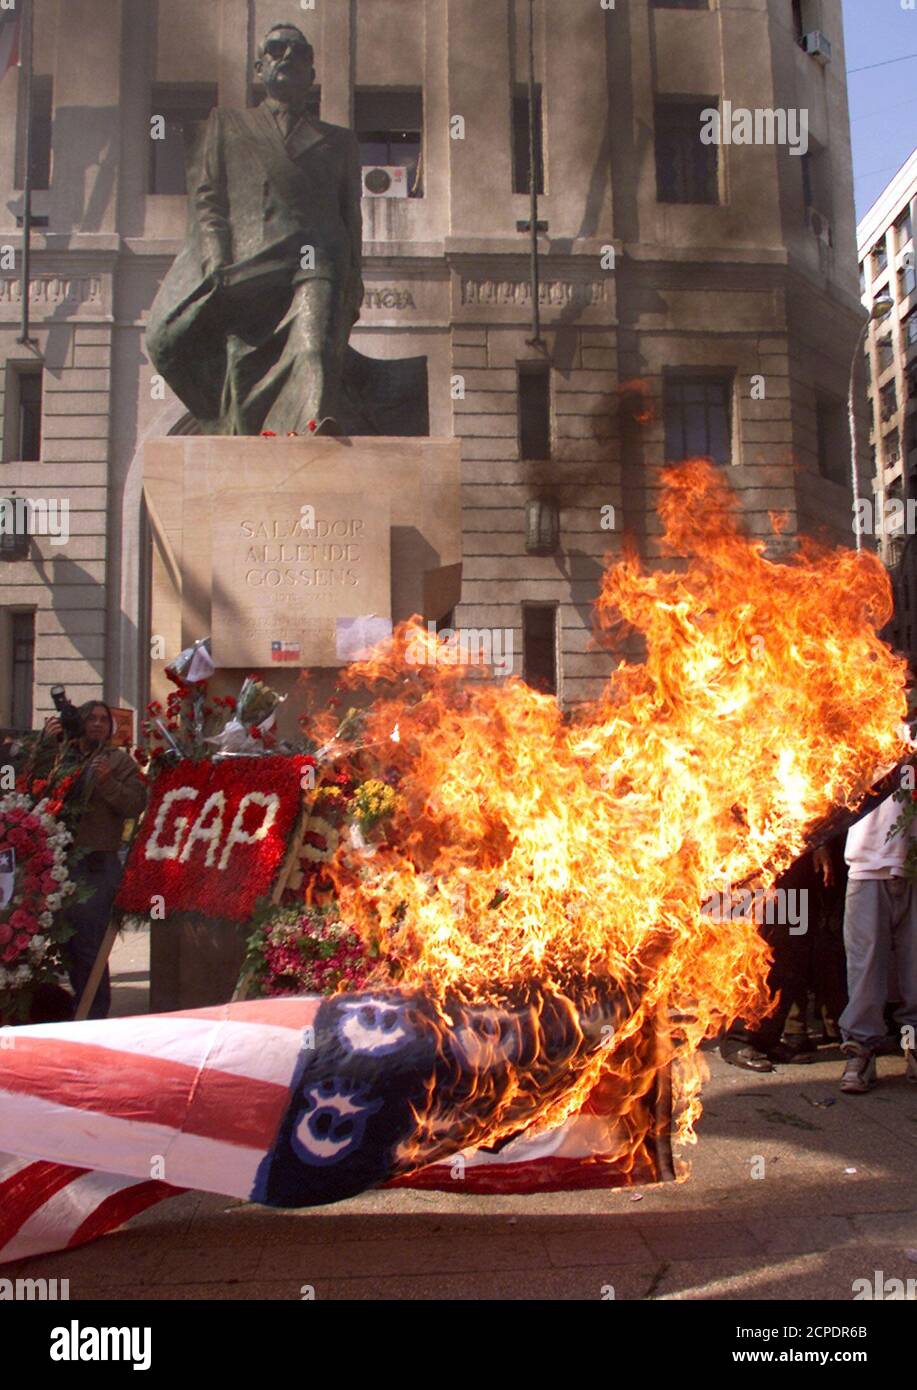 A U.S. flag burns in front of the statue of President Salvador Allende next  to the La Moneda presidential palace in Santiago, September 11, 2002.  Socialists and communists clashed during a ceremony